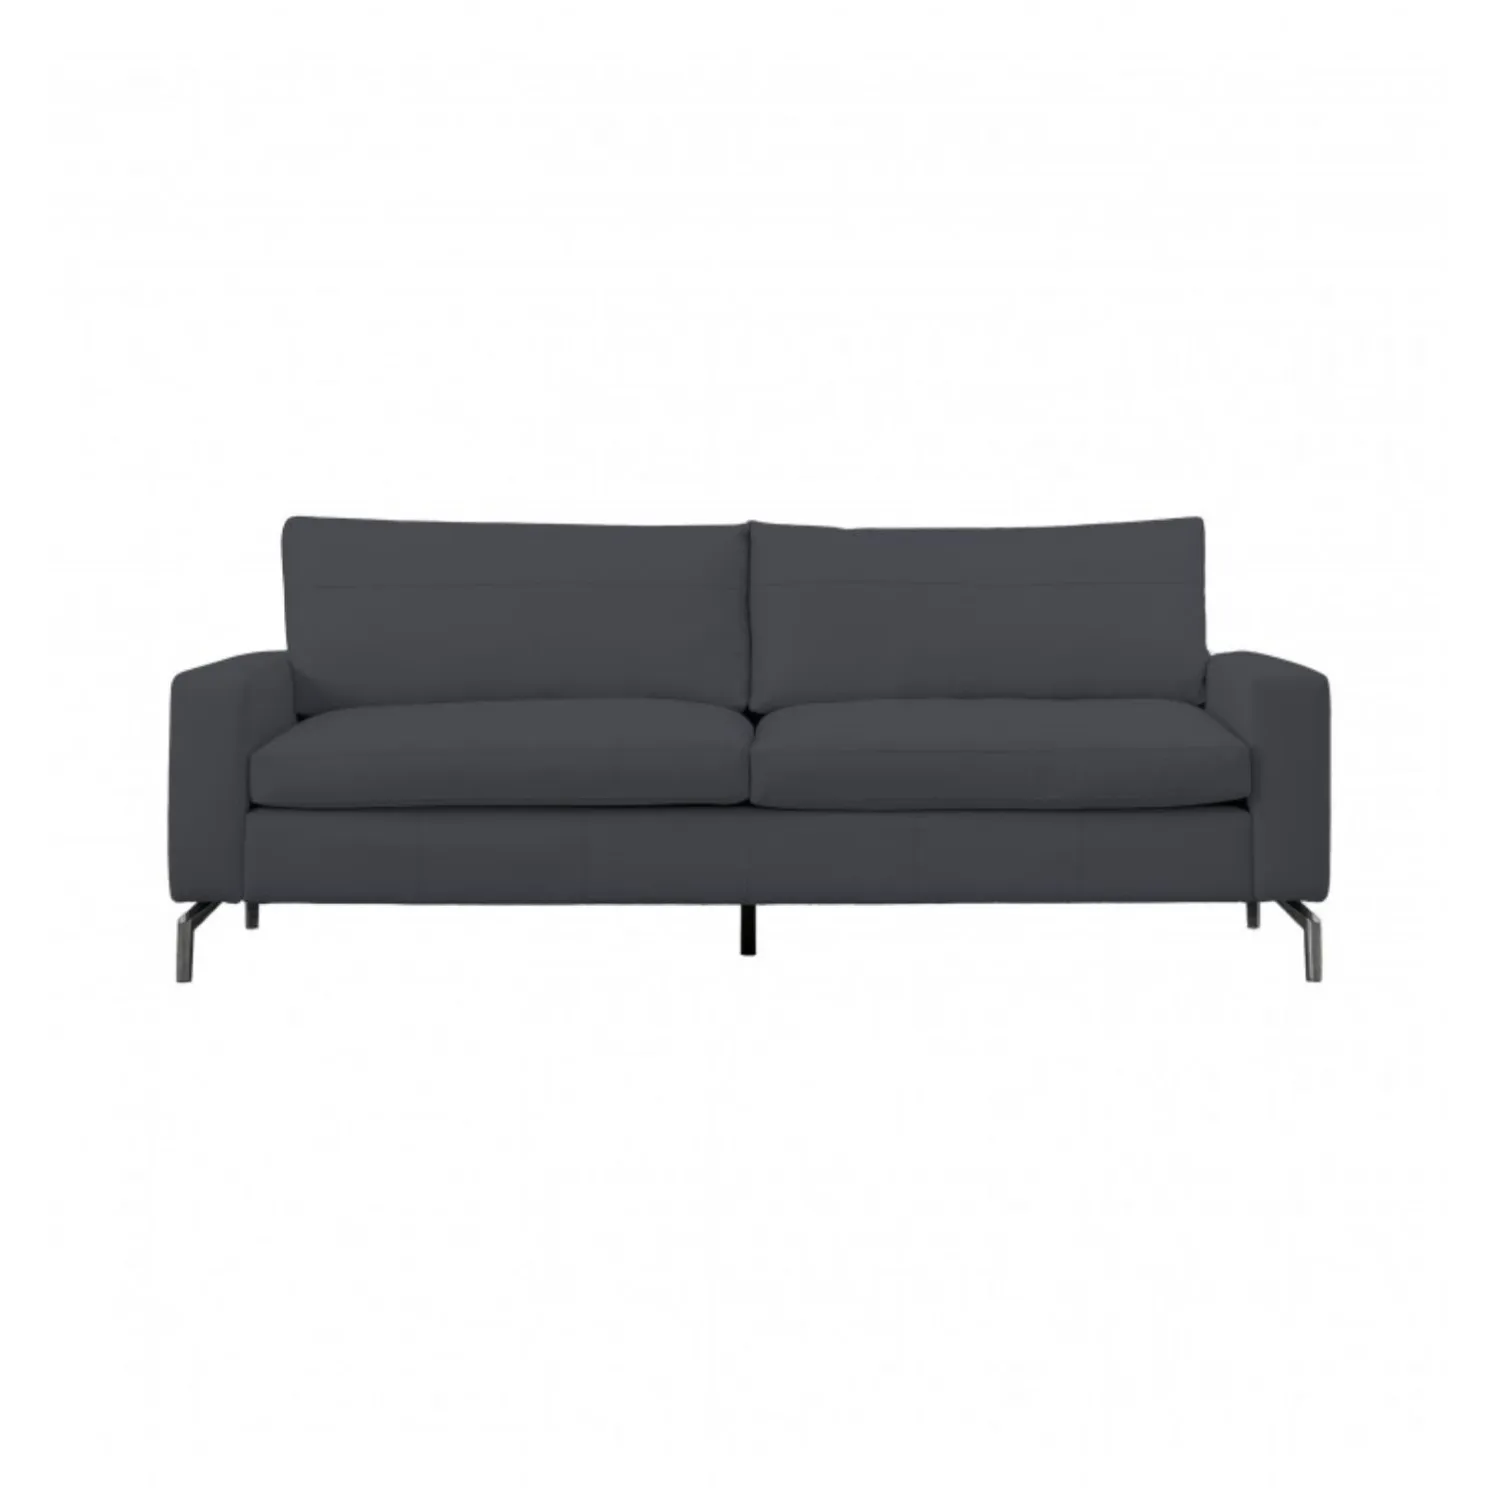 Modern Style Sabino Jet Faux Leather Upholstered Living Room 3 Seater Sofa 86x218cm